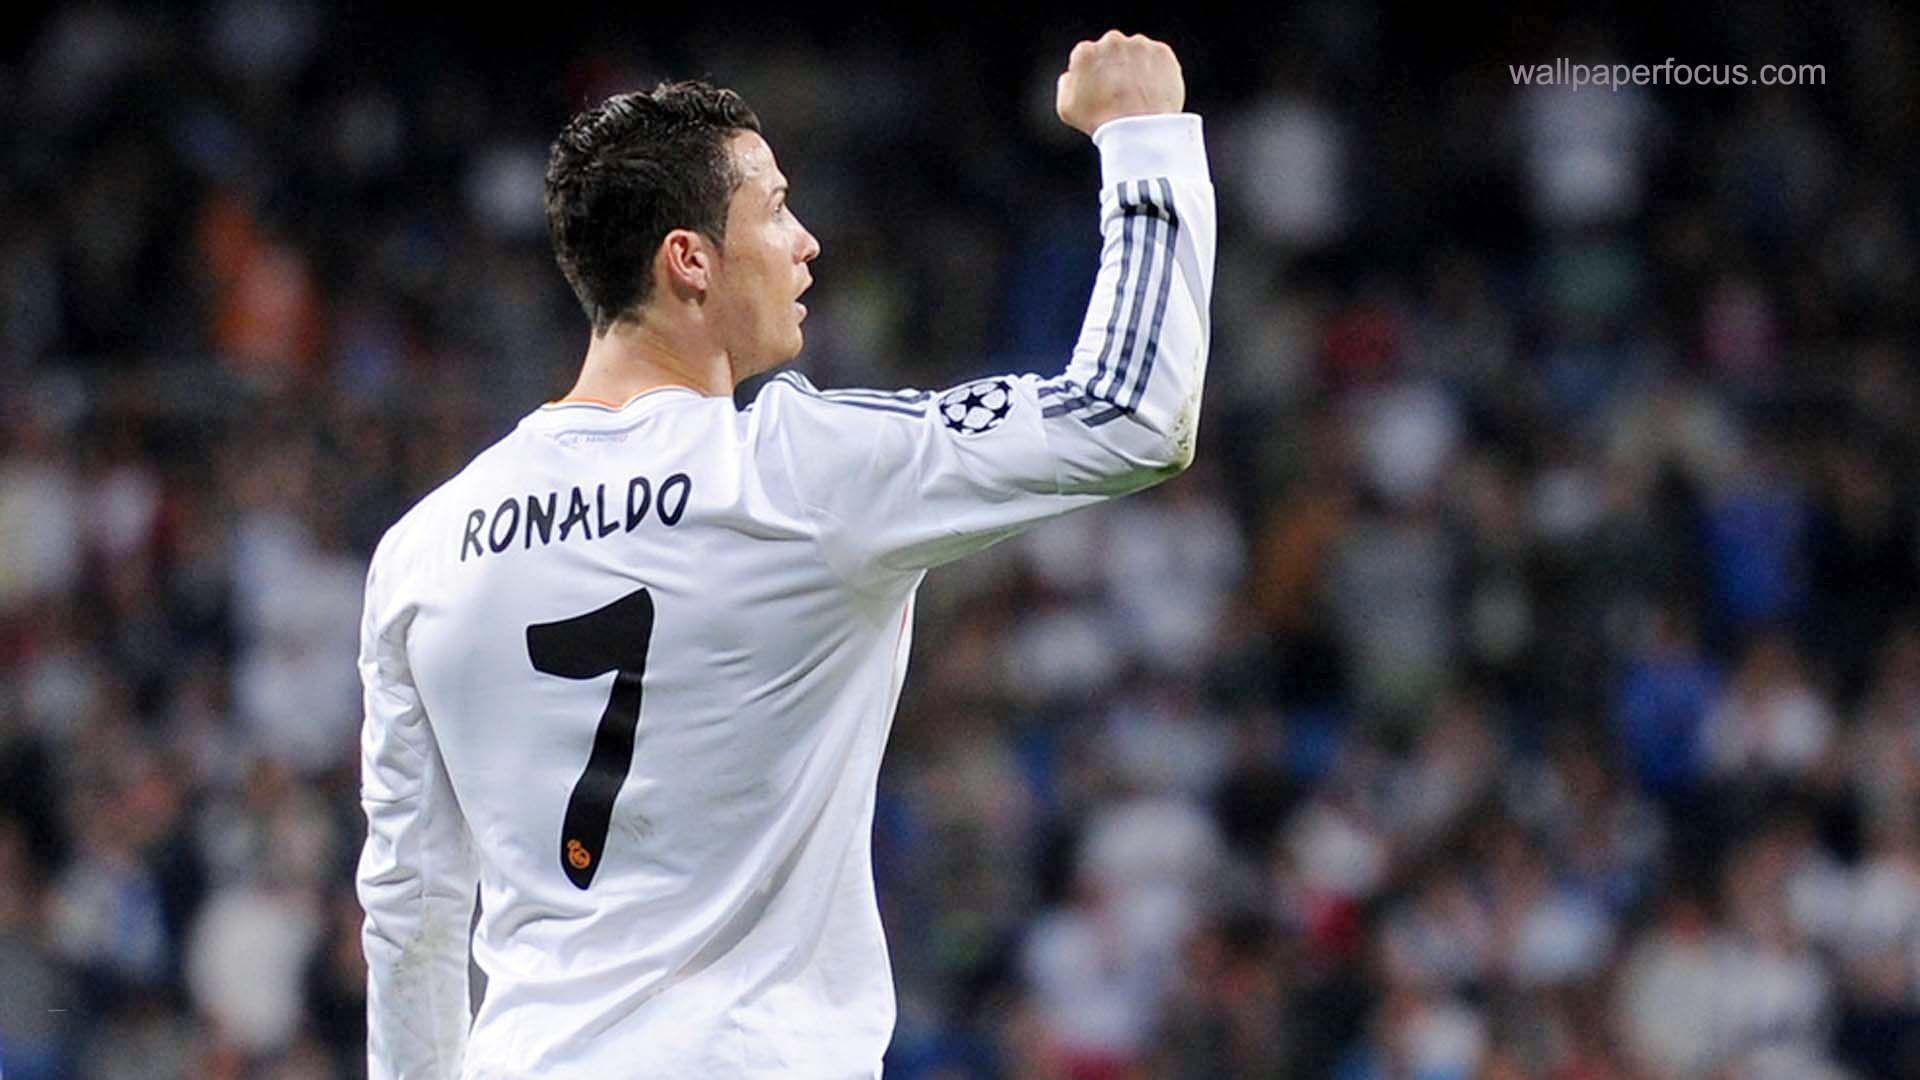 Quality Image of Cristiano Ronaldo HD: 1920x1080 for mobile and desktop